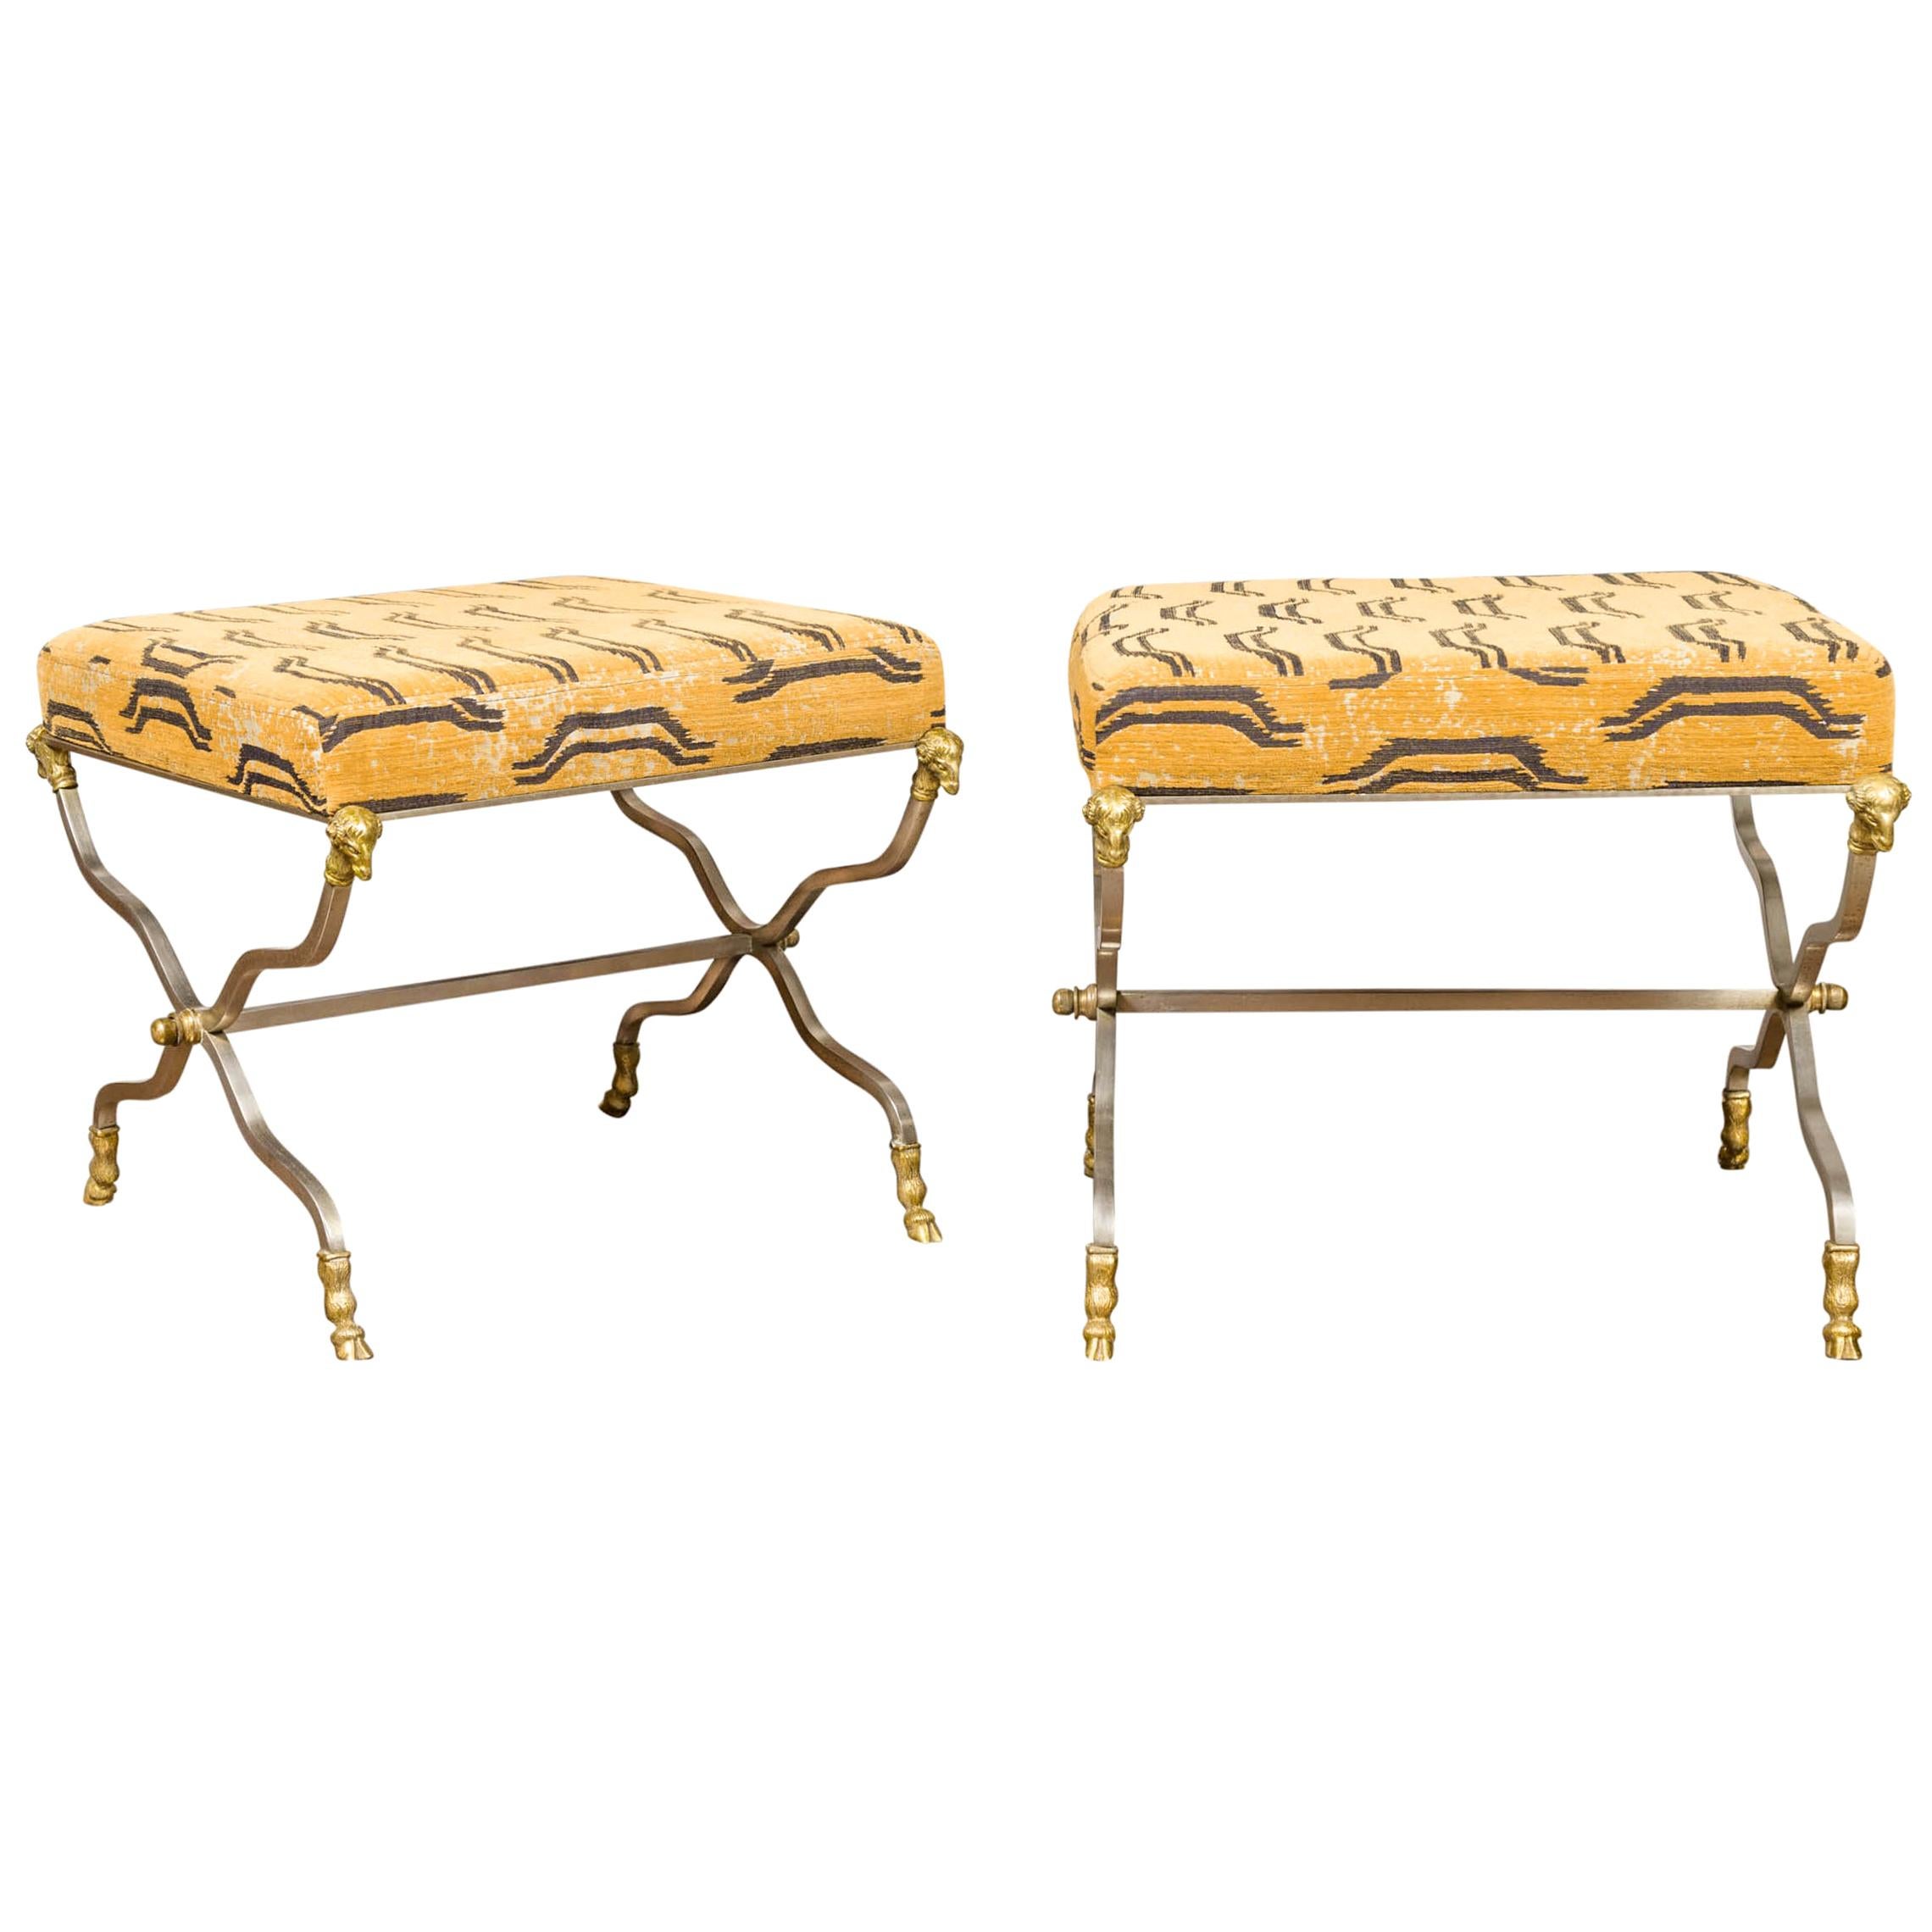 Pair of Italian Maison Jansen Style Steel and Bronze Stools with Rams' Heads